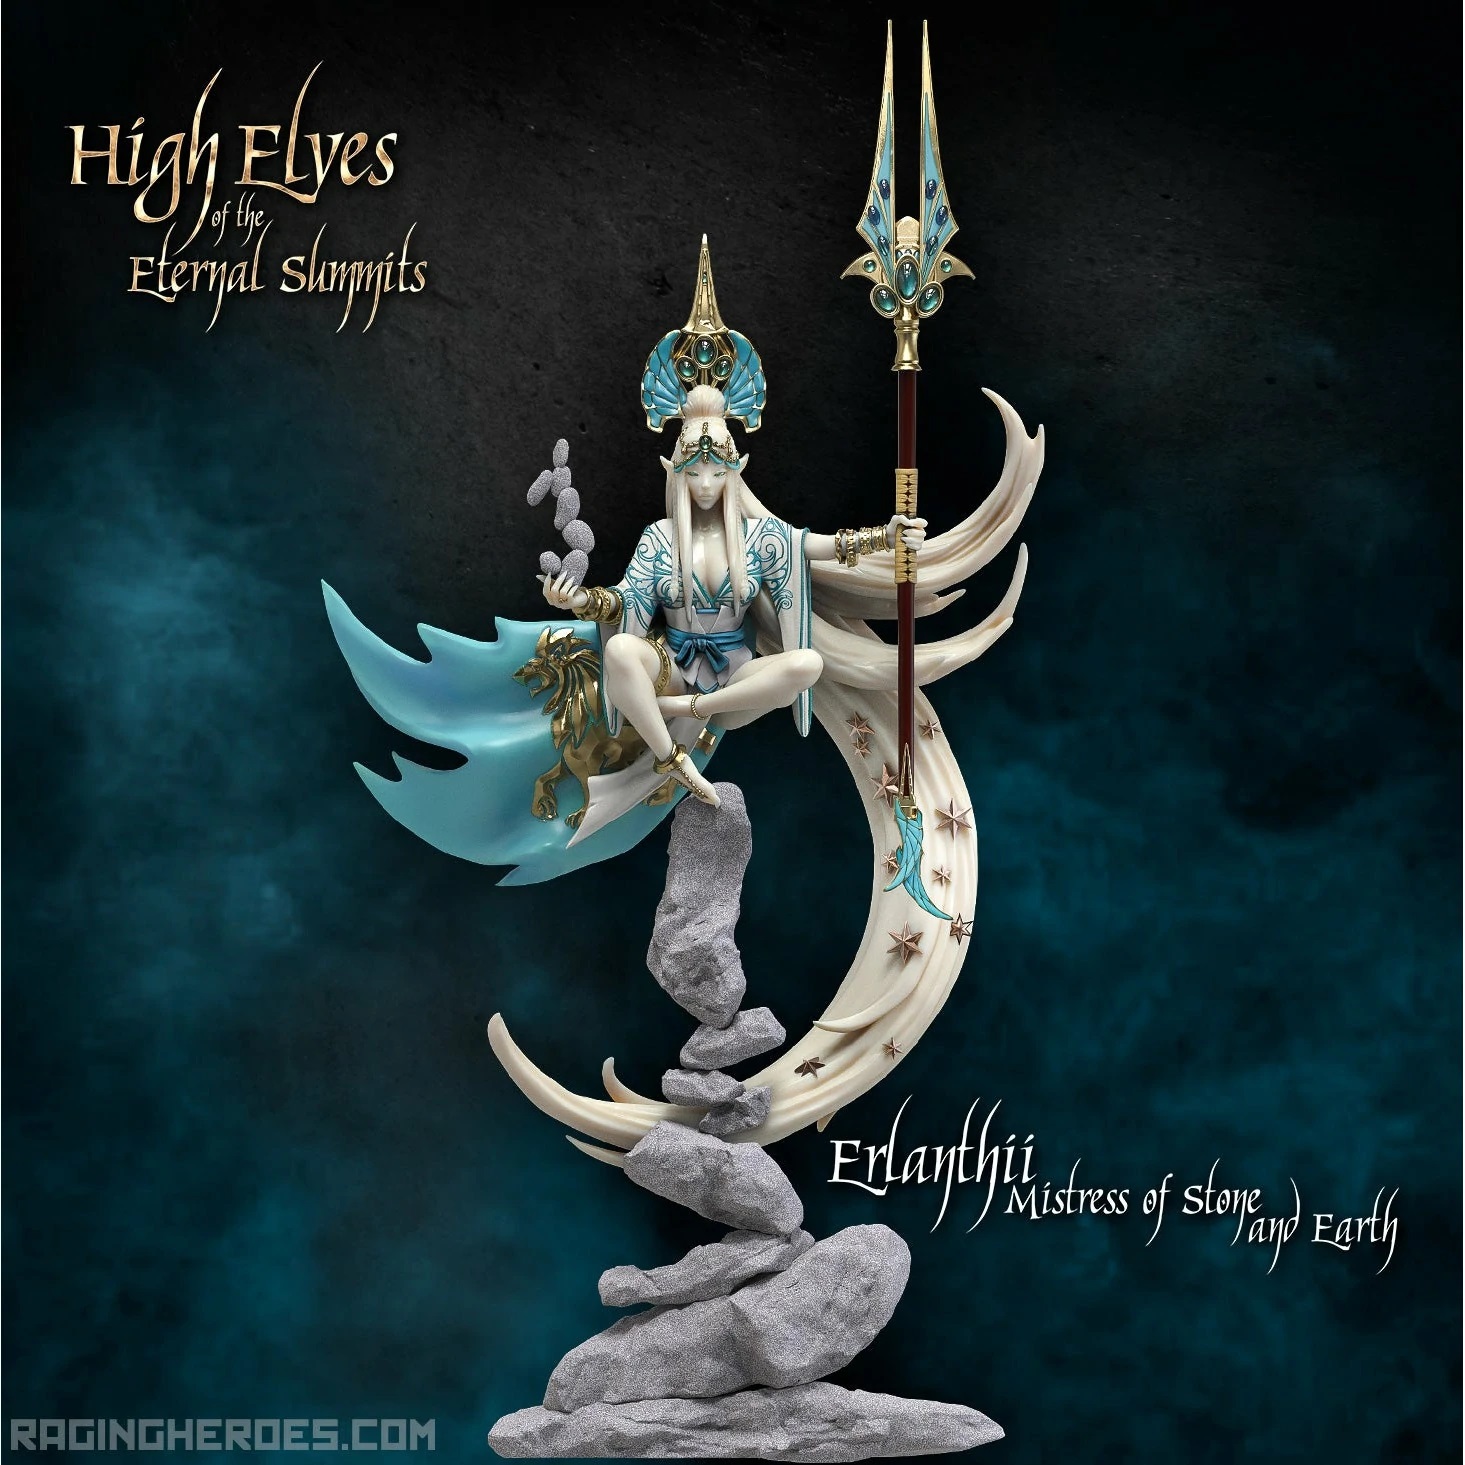 Erlanthii Mistress Of Stone And Earth - Raging Heroes NEW